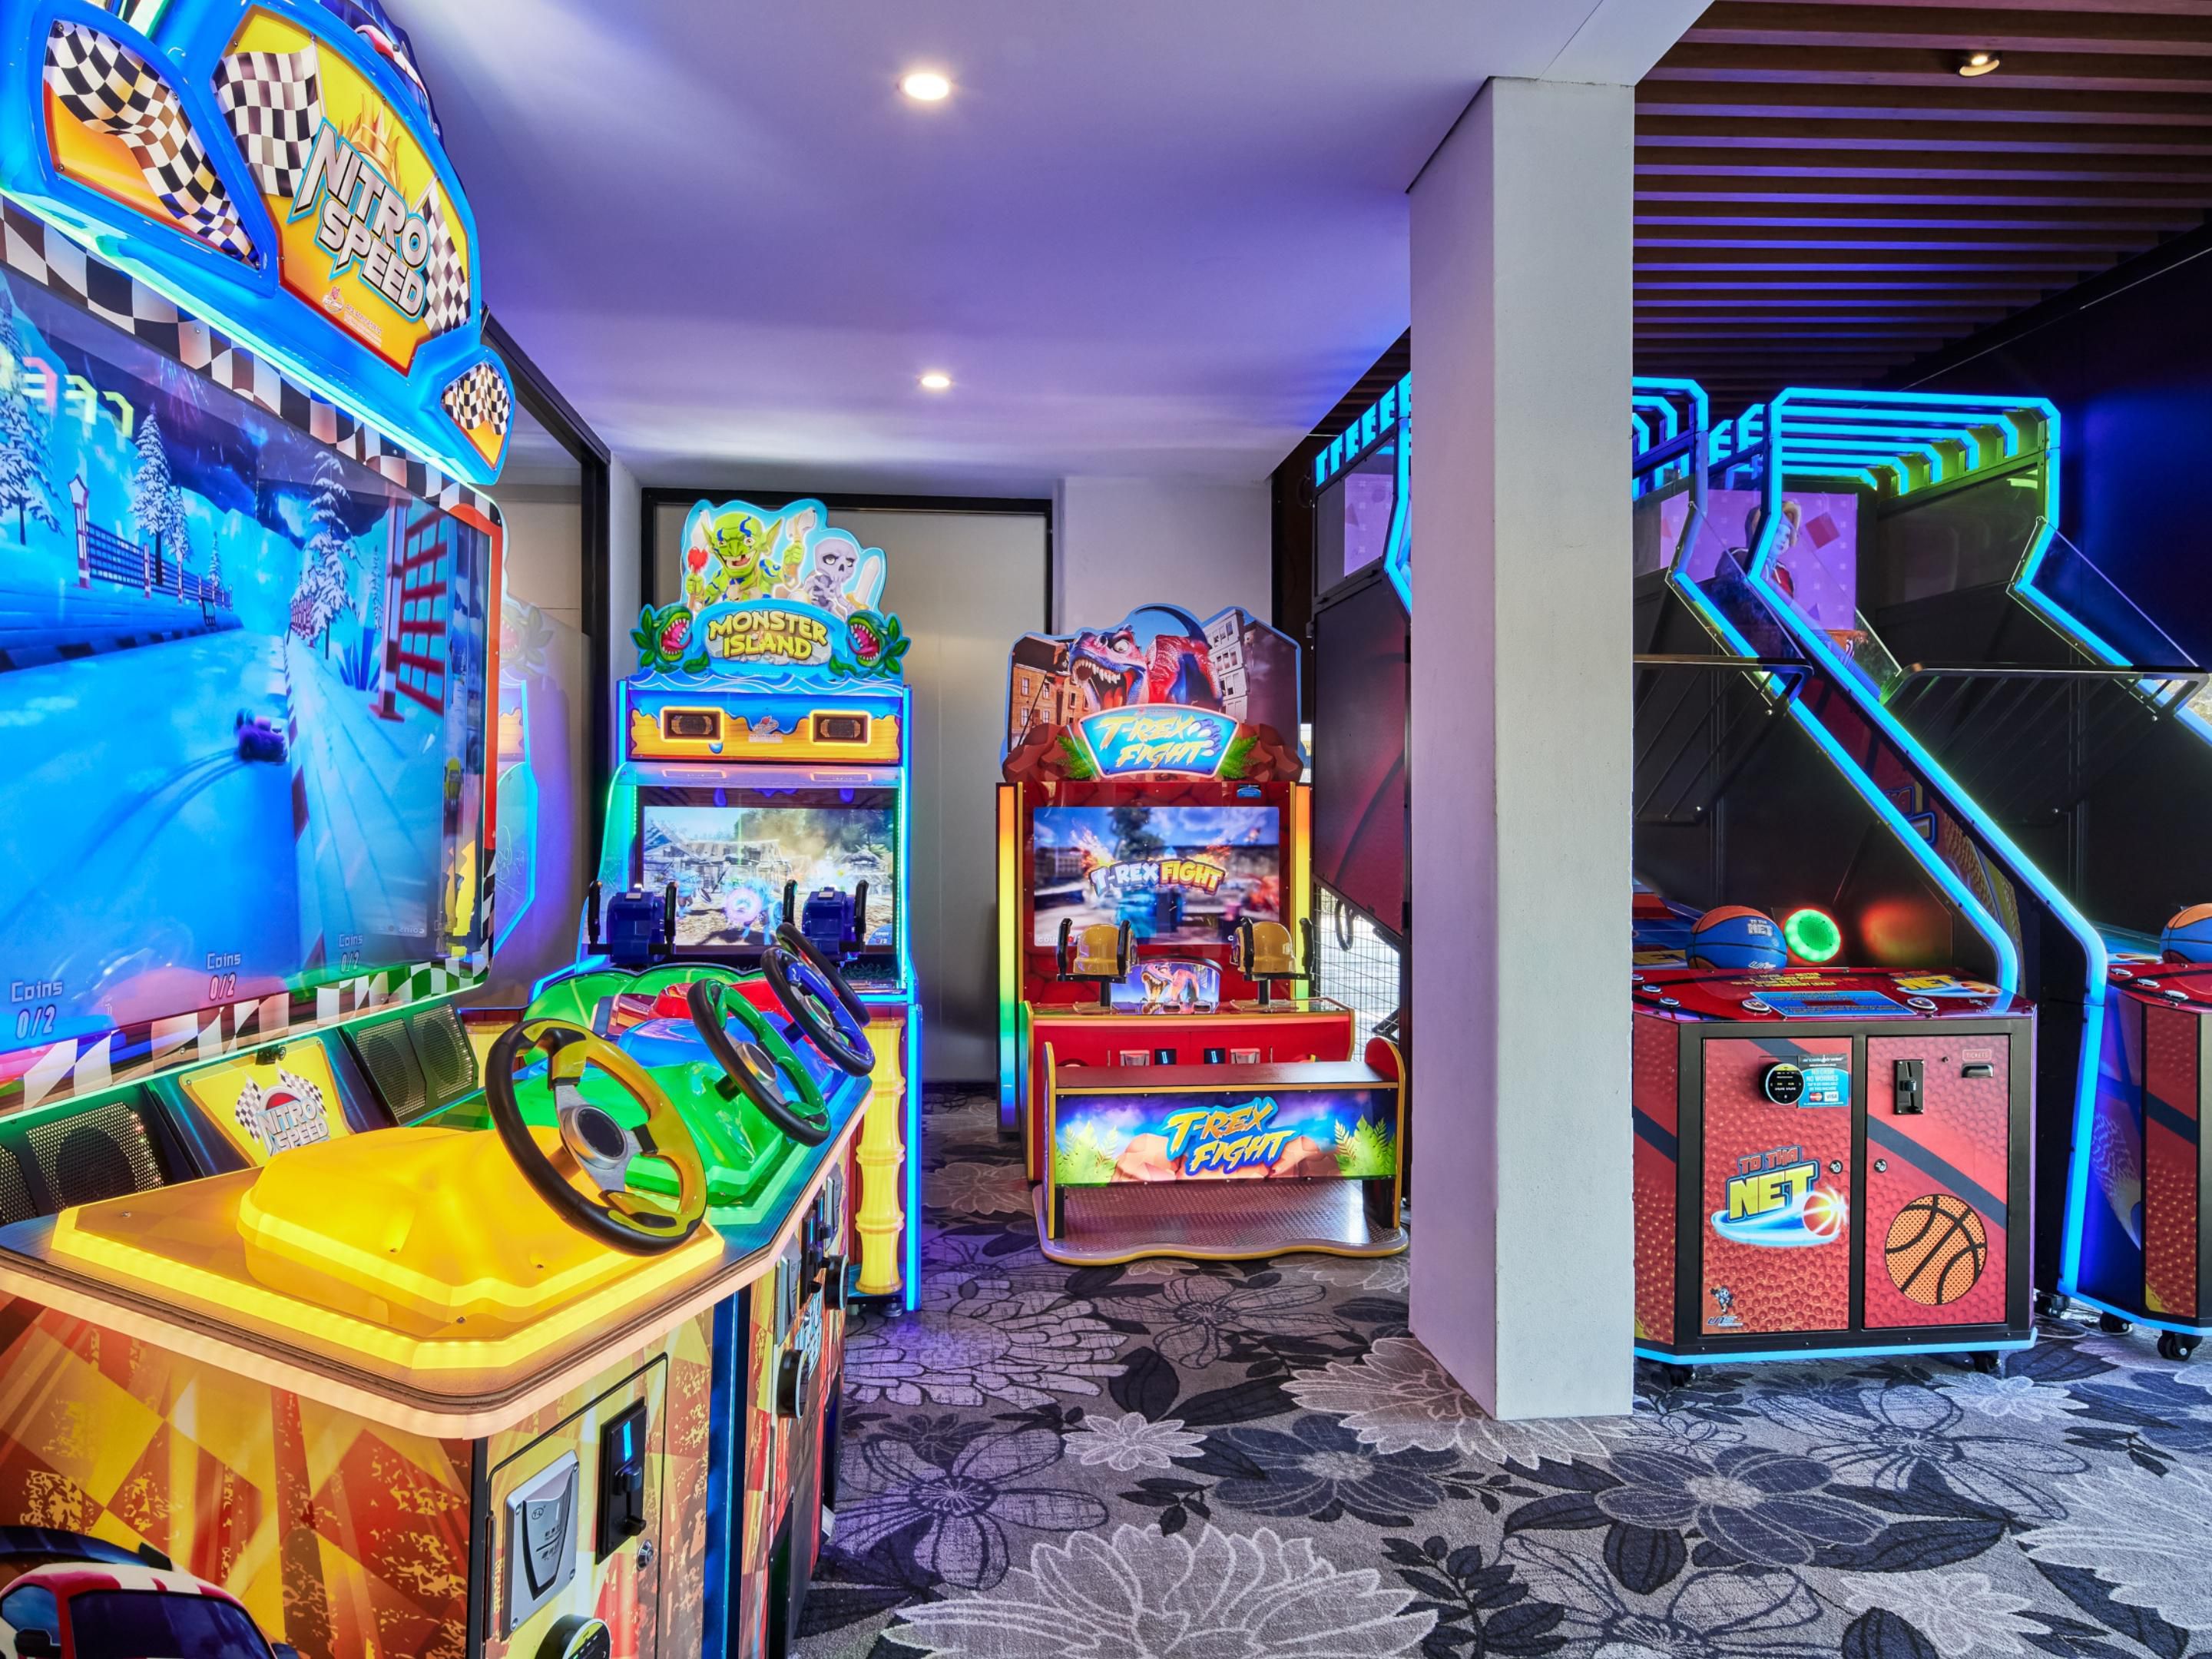 Enhance your family vacation with our vibrant kids arcade room. From basketball to monster island adventures, it's a fun haven for kids of all ages. The perfect treat for leisure travelers looking for family-friendly amenities in Warwick Farm.